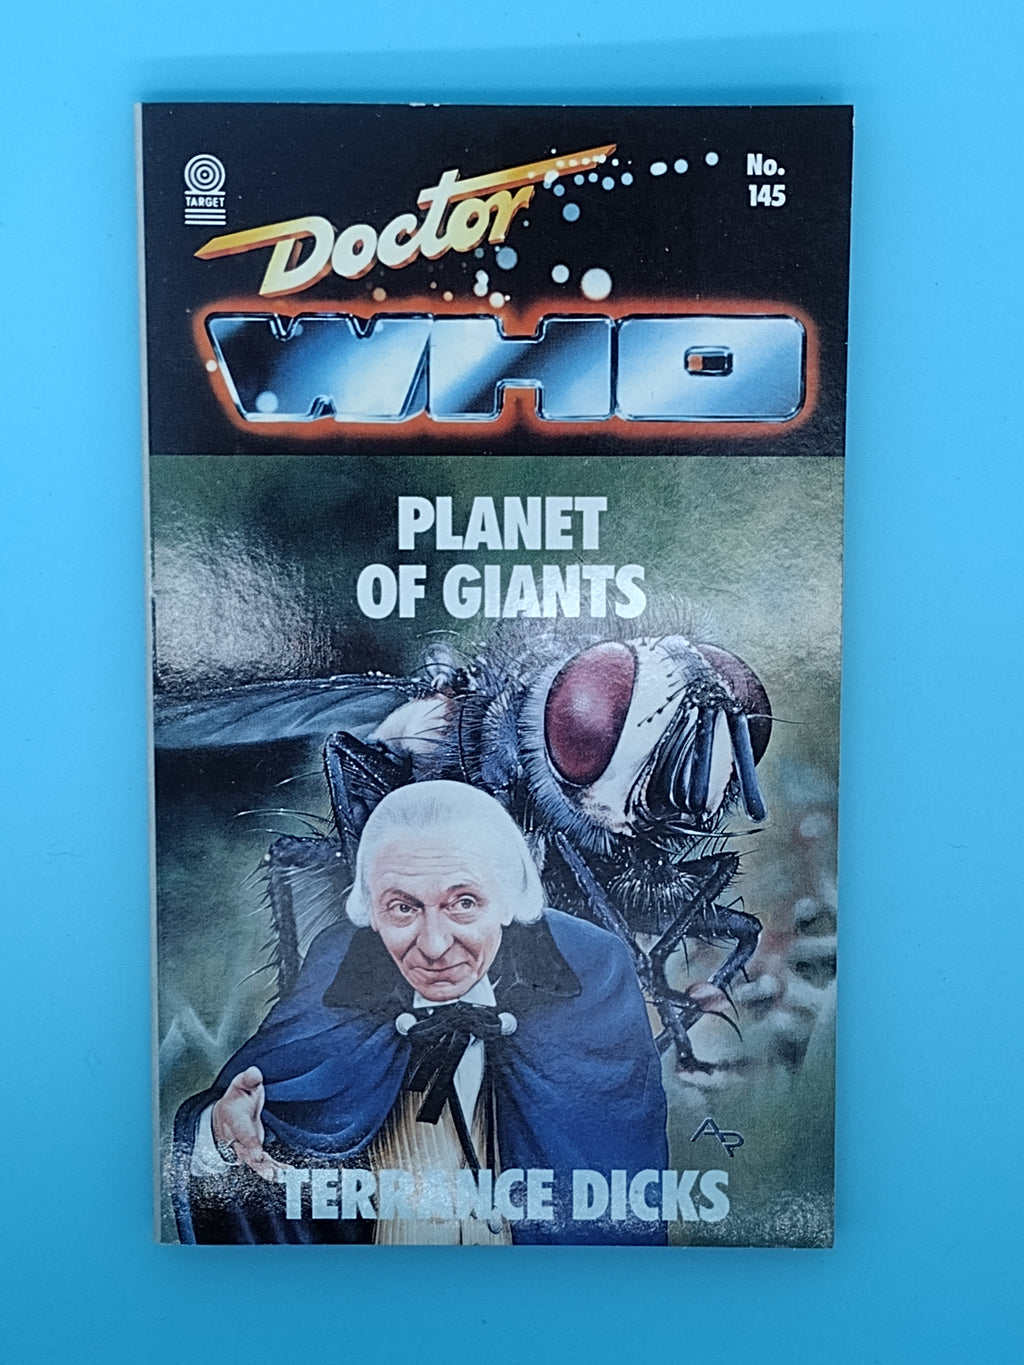 Doctor Who: Planet of Giants by Terrance Dicks